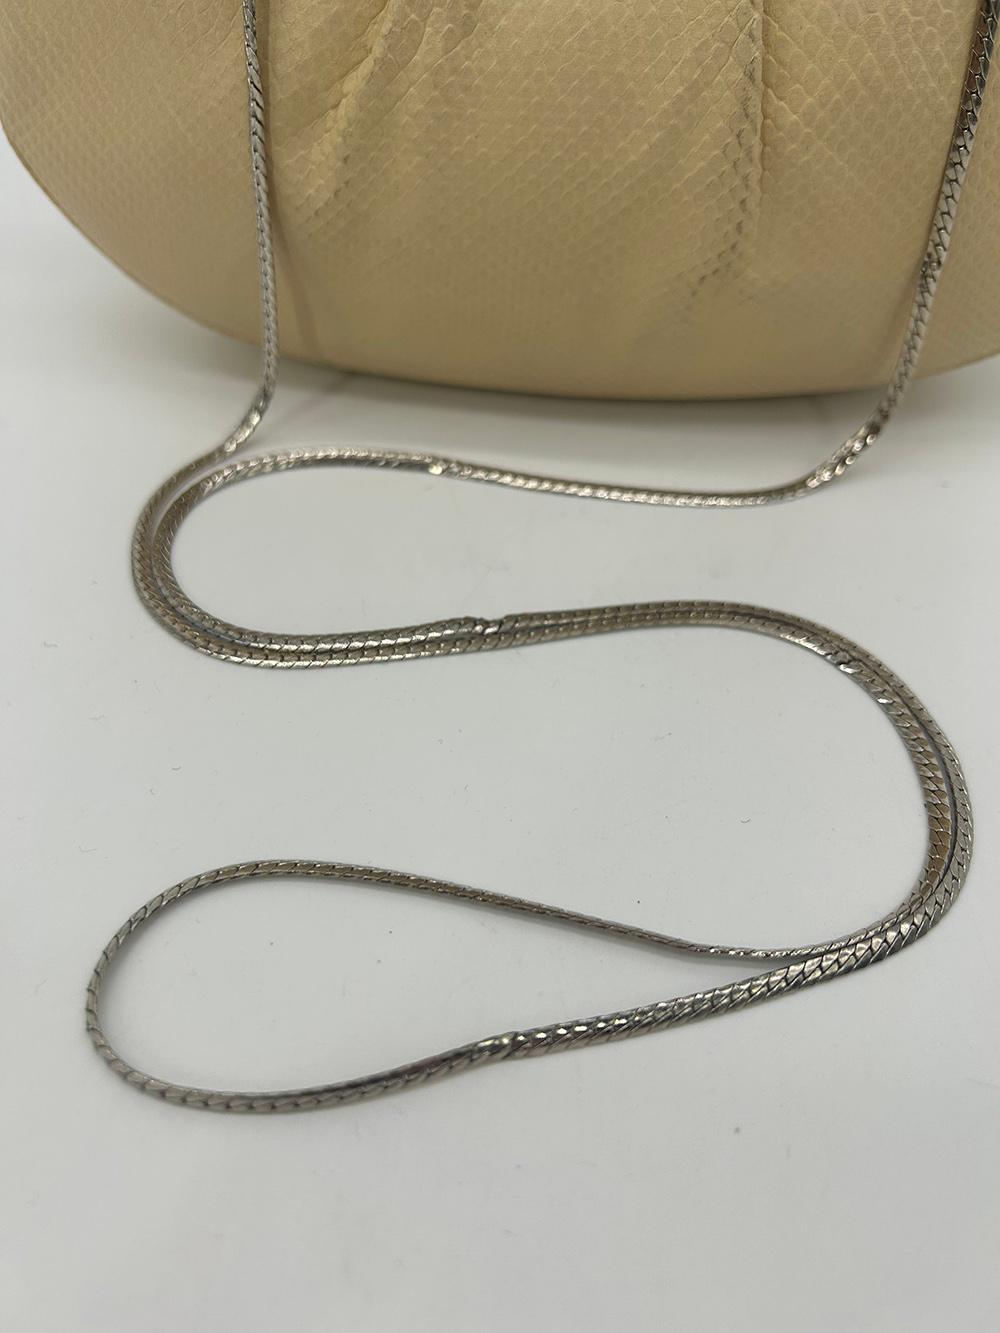 Judith Leiber Cream Matte Lizard Clutch with Enamel Crystal Top For Sale 12